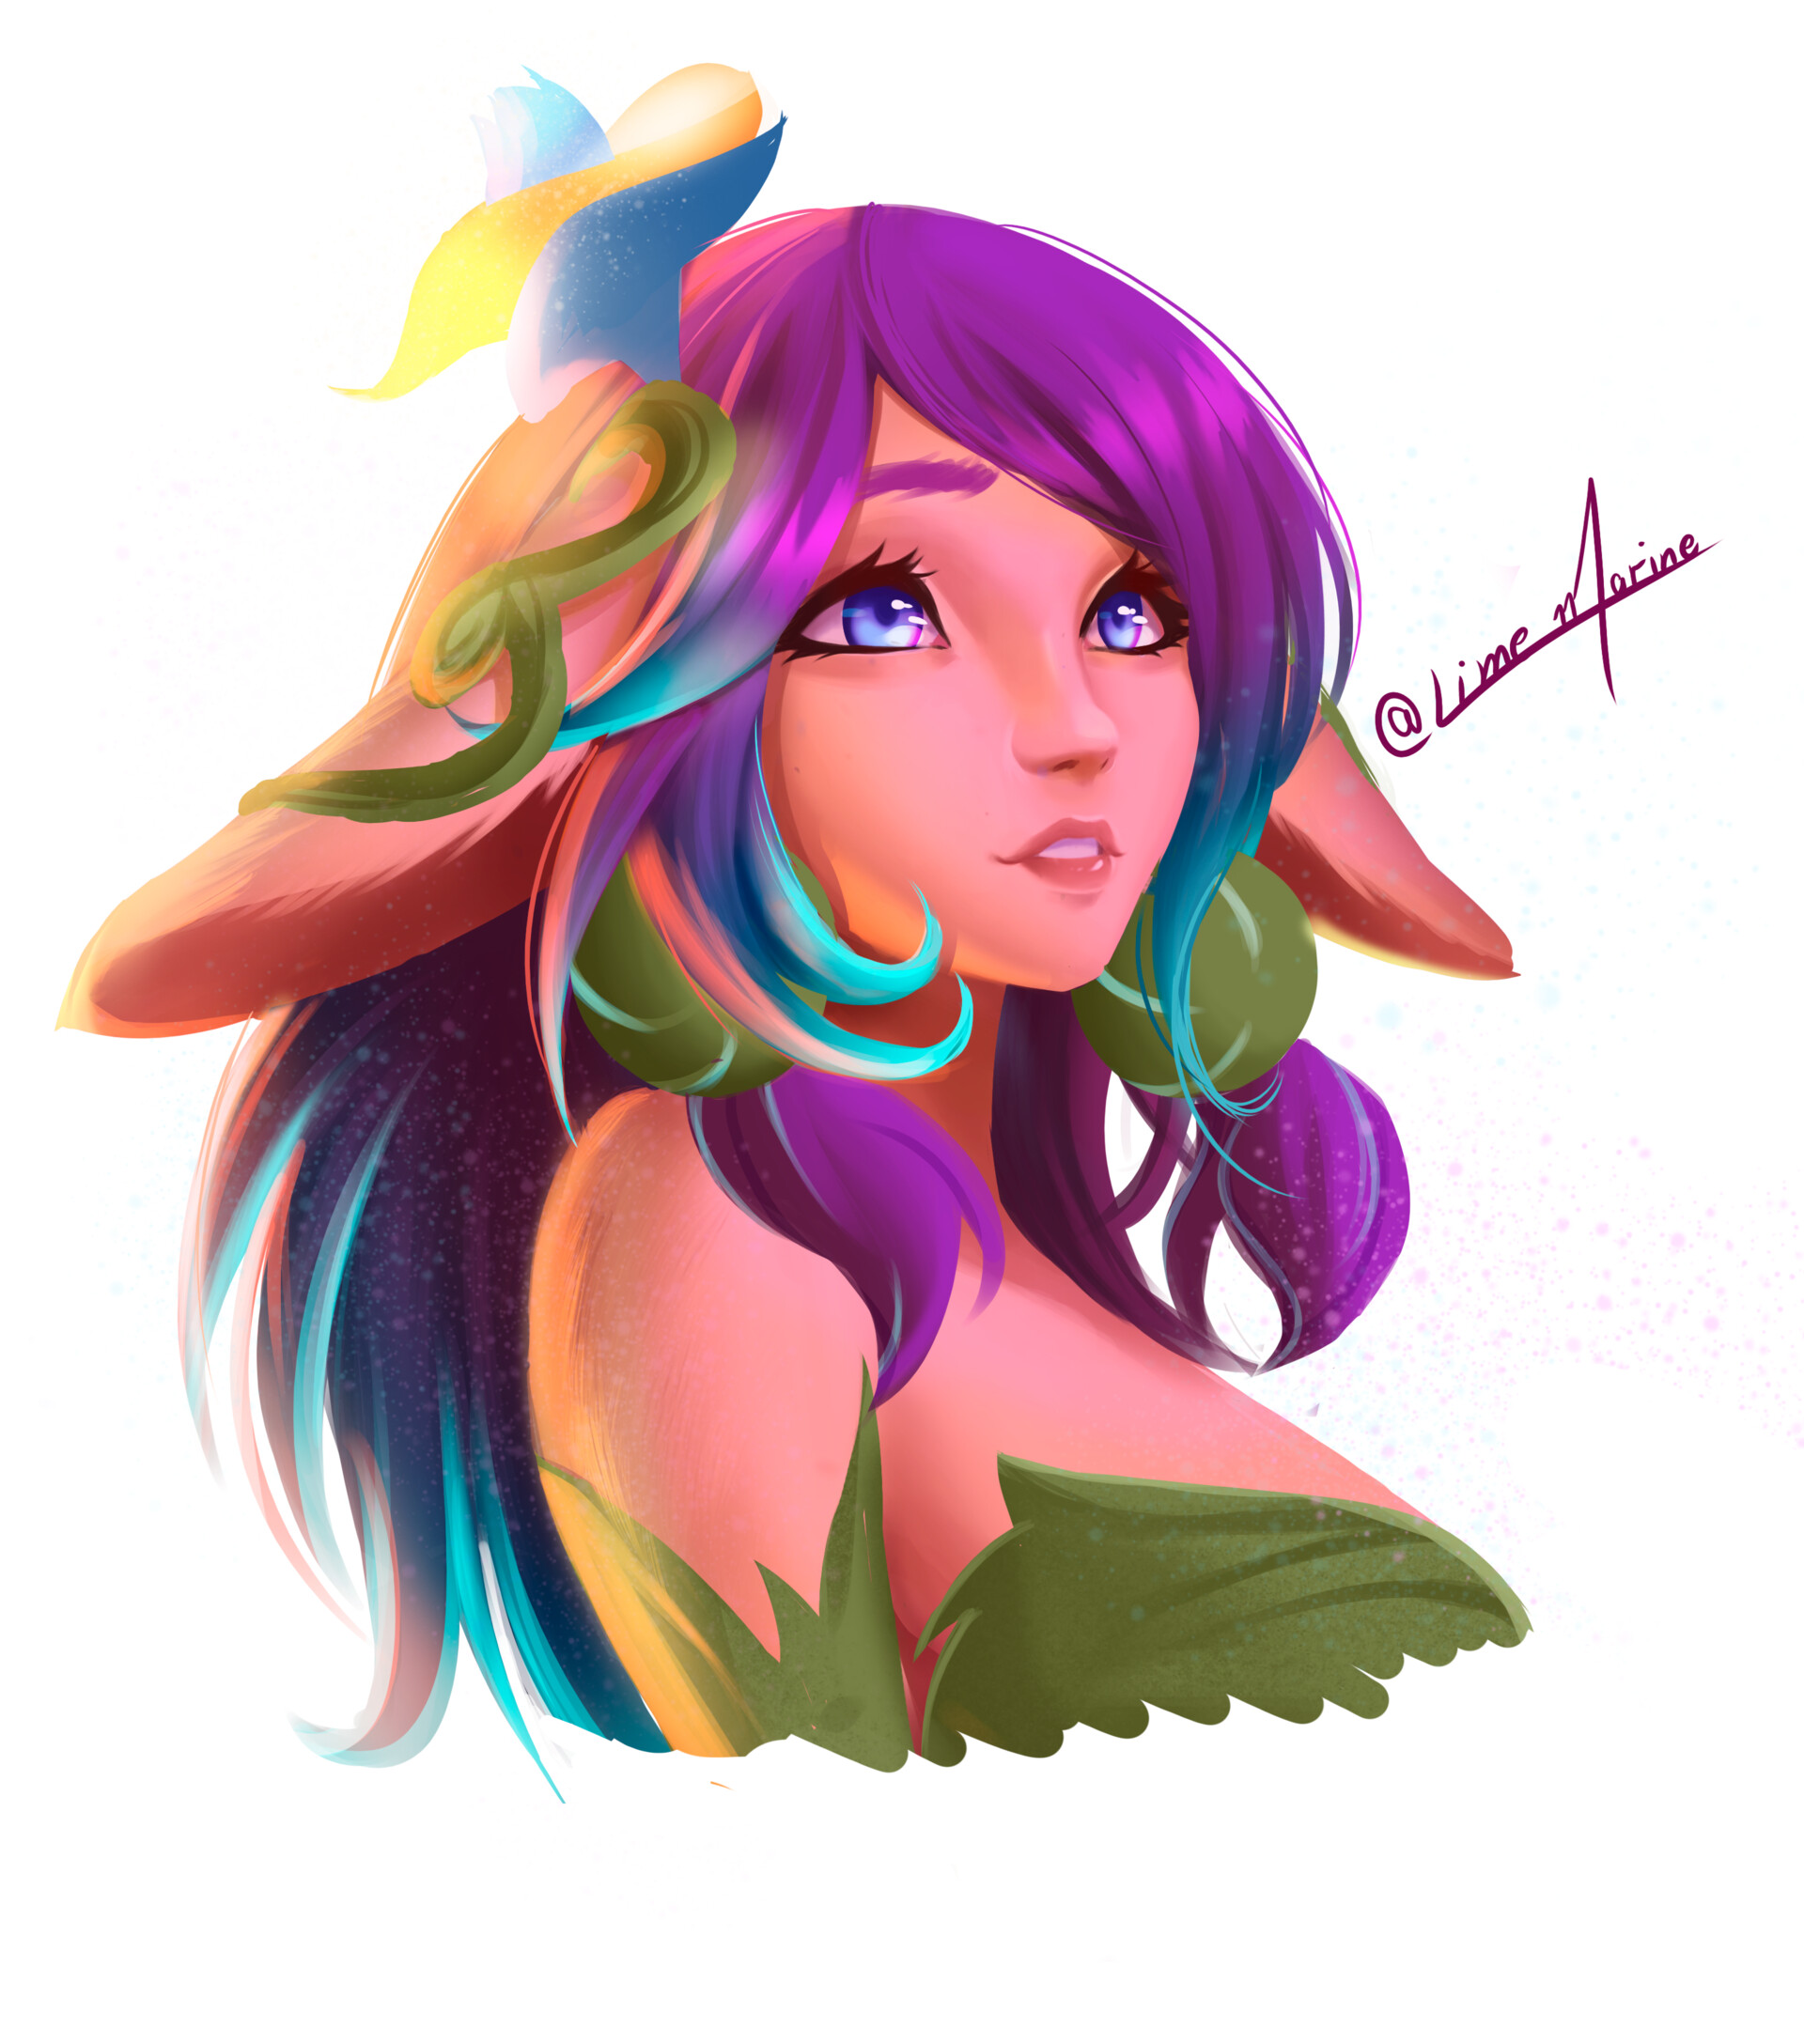 Quick fanart I did of Lillia from League of Legends.